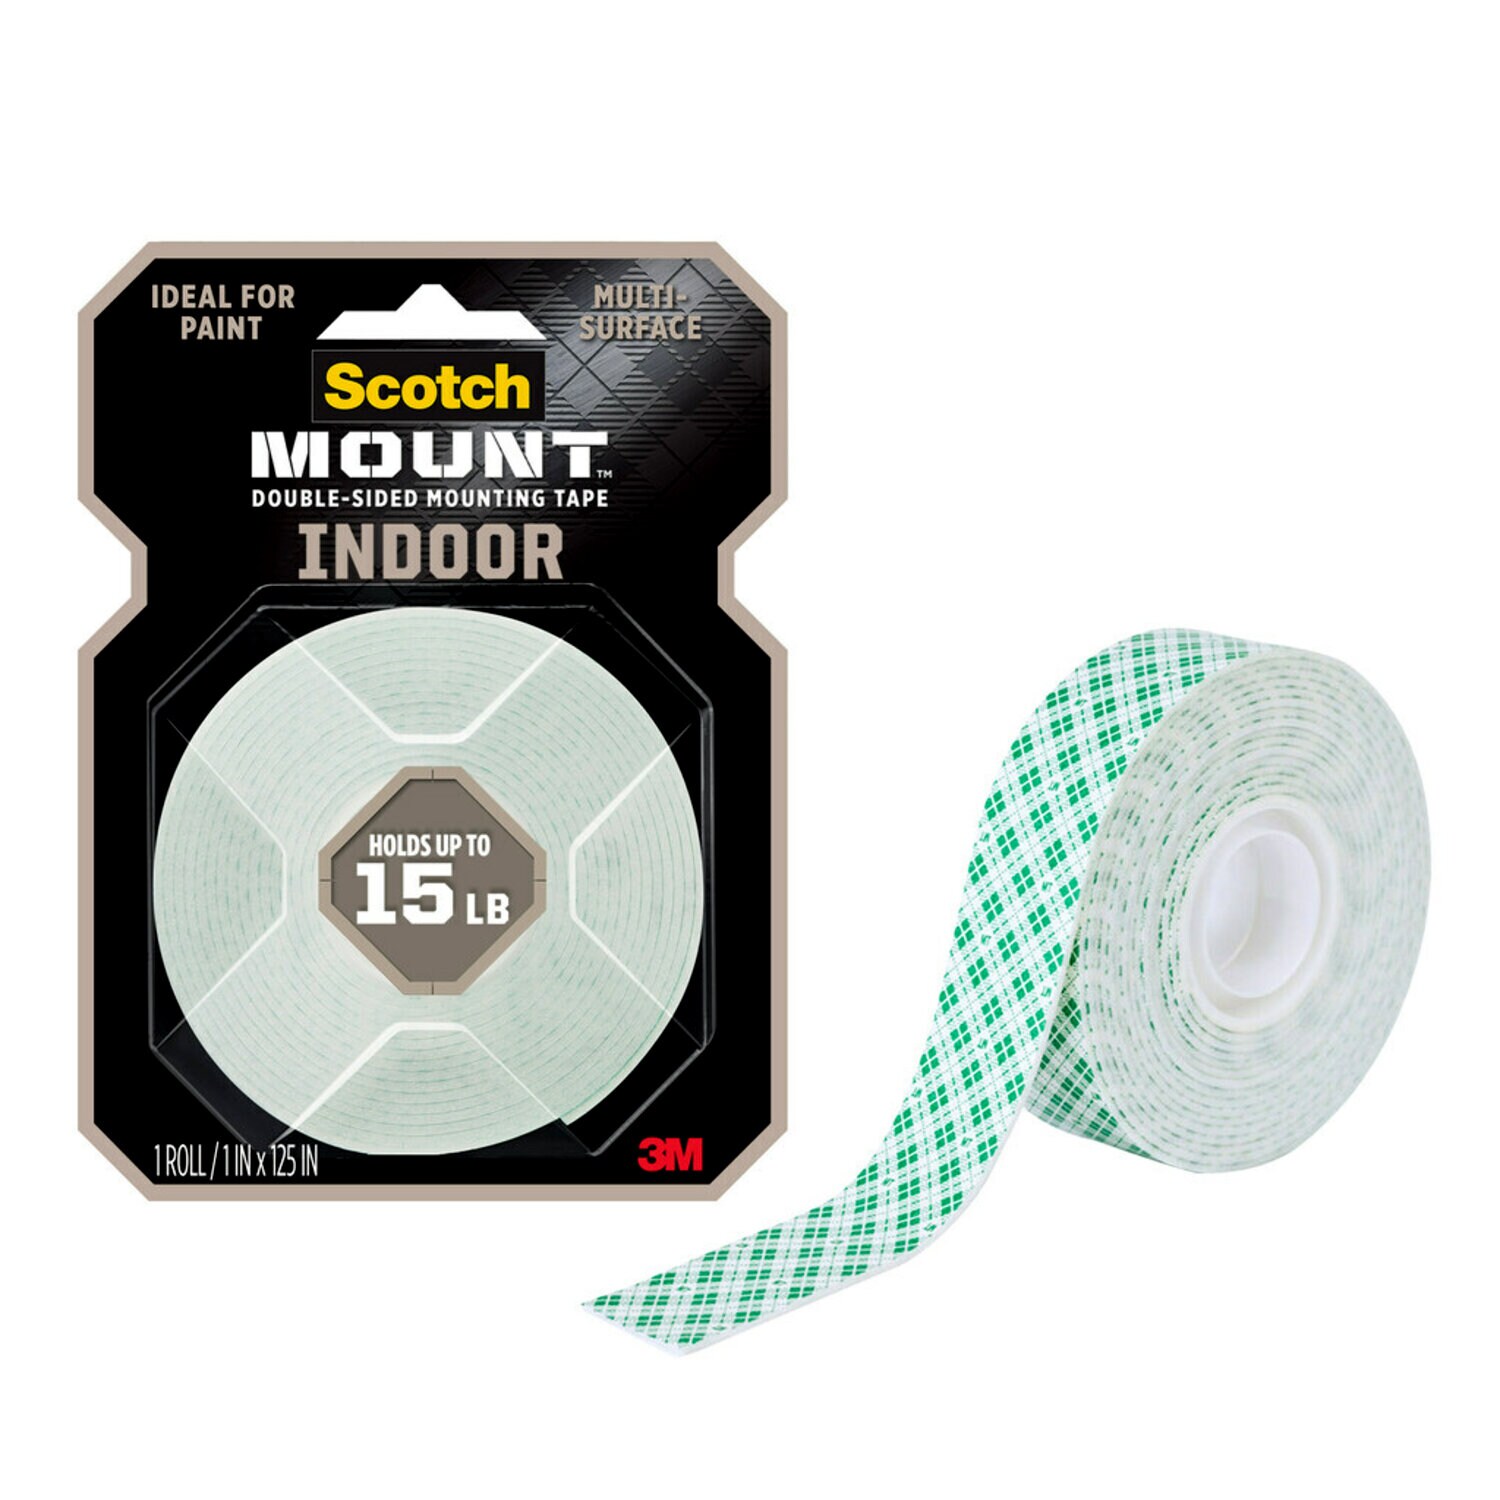 7100216168 - Scotch-Mount Indoor Double-Sided Mounting Tape 314H-MED-DC, 1 in x 125 in (2,54 cm x 3,17 m)